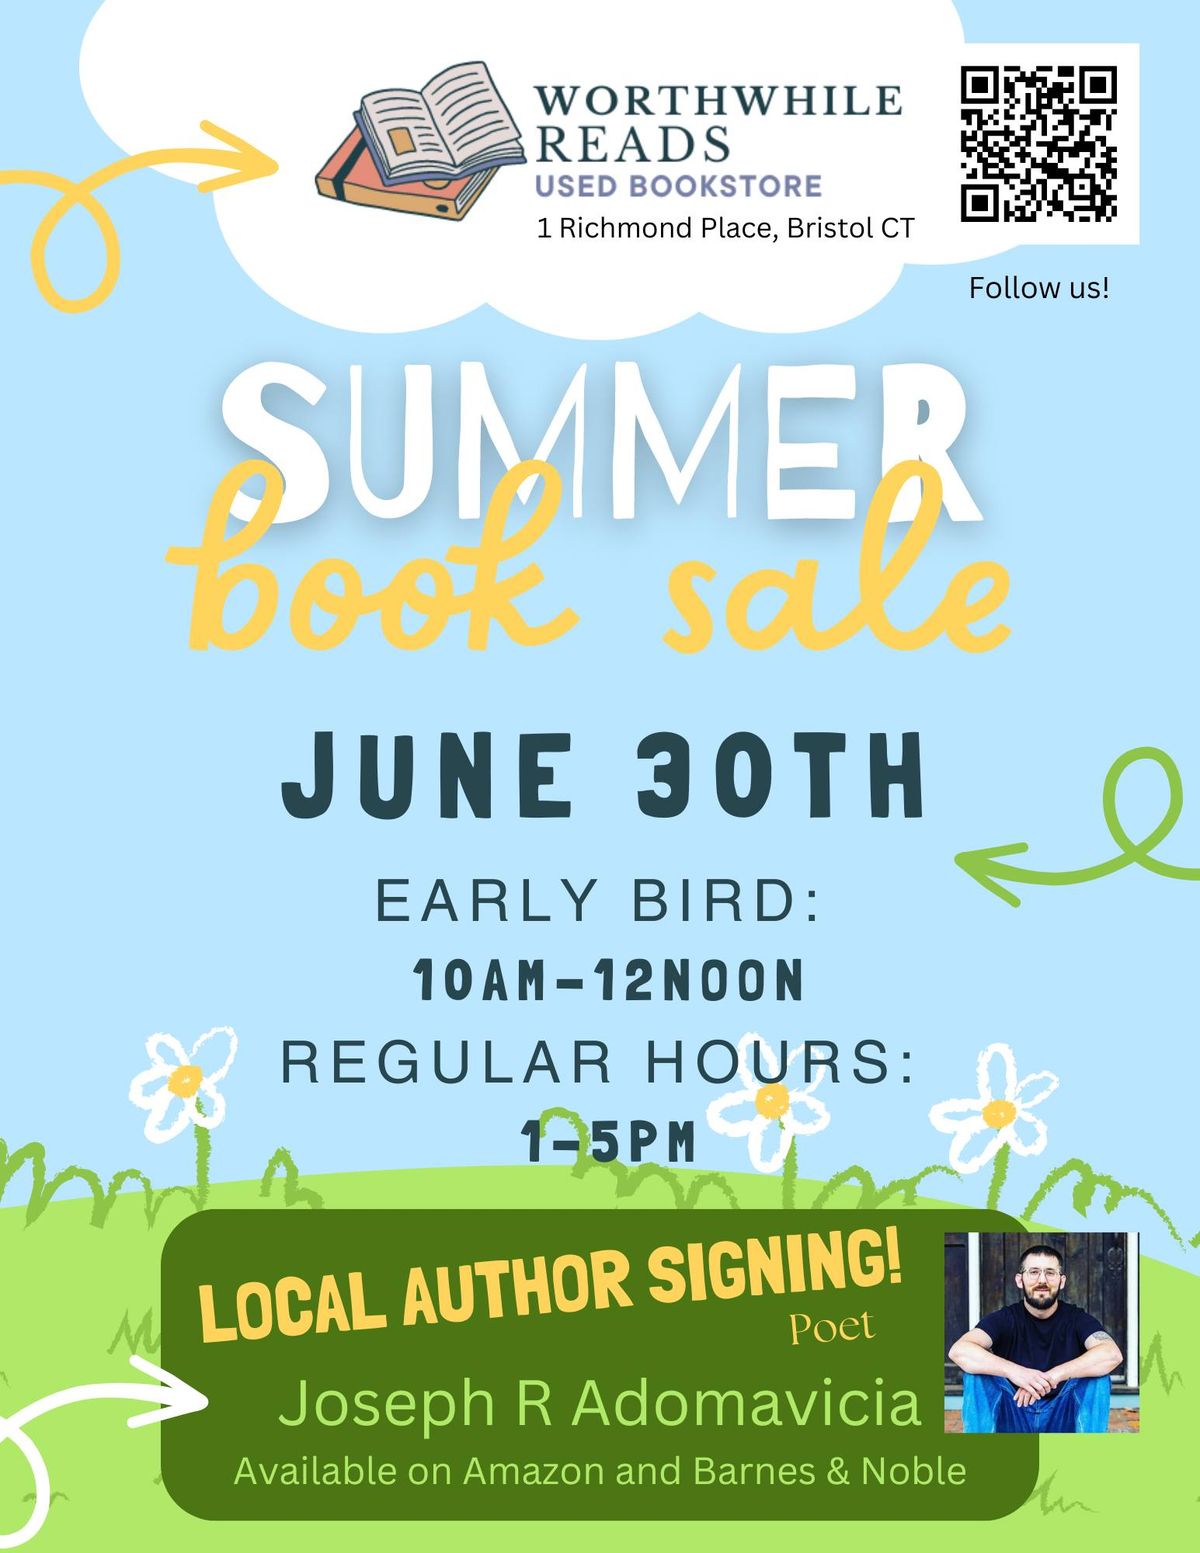 SUMMER BOOK SALE!!  Over 23,000 books!! NO Early Bird This Sale!